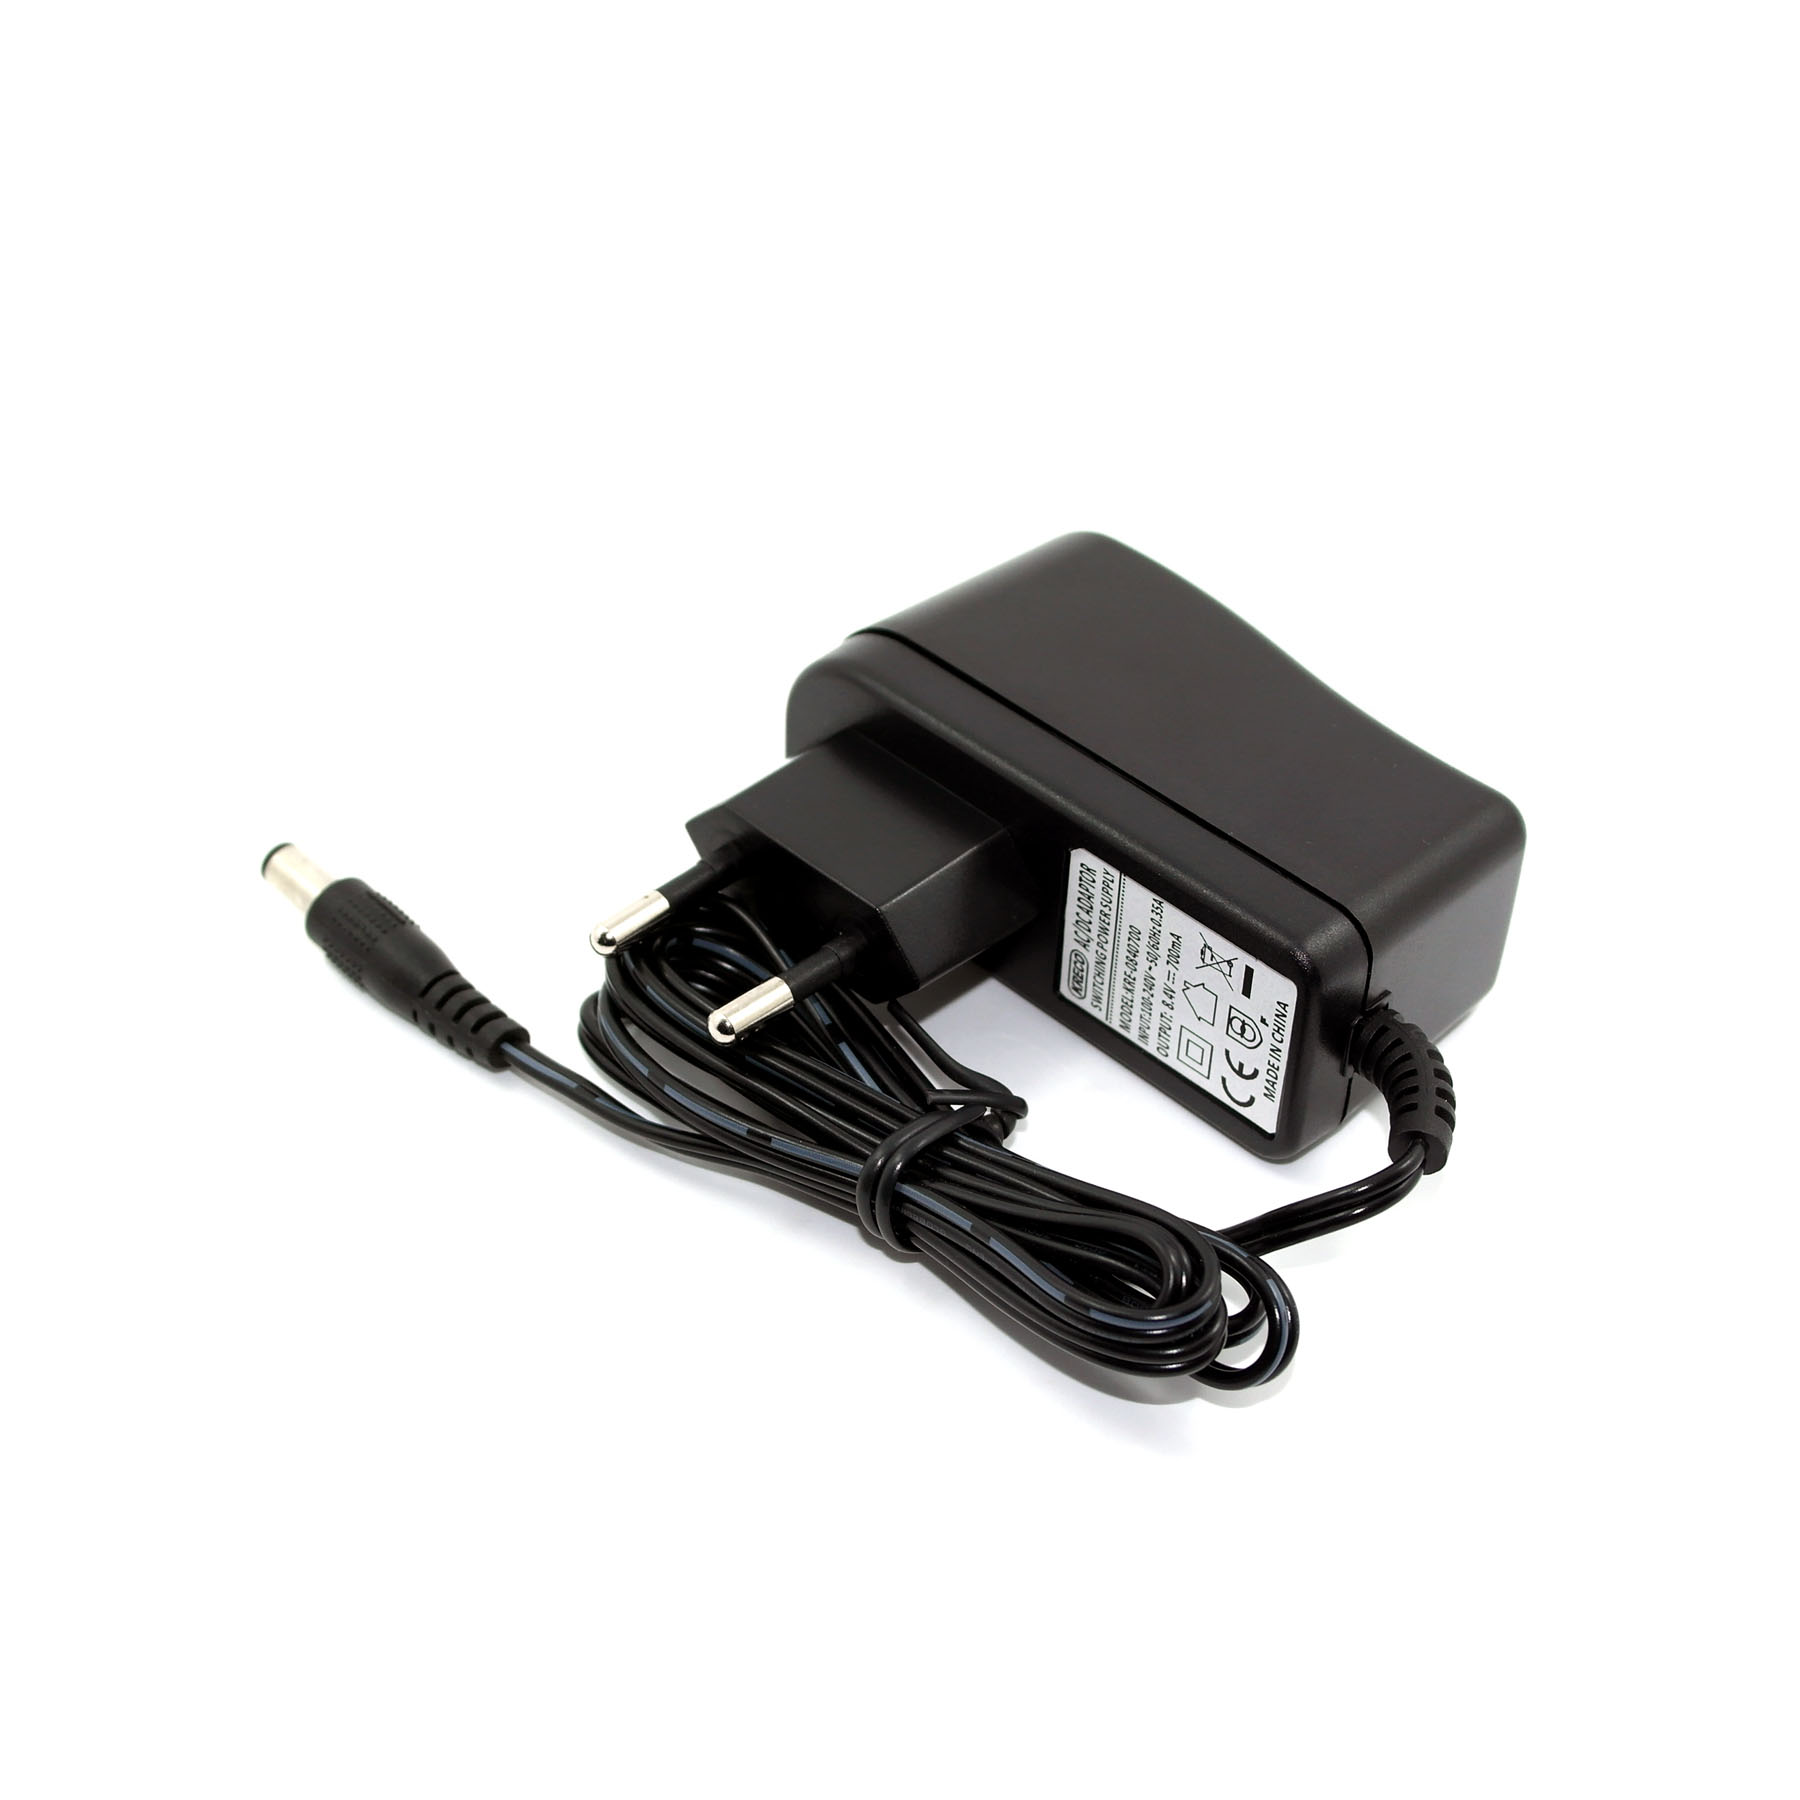 8.4V 0.7A power supply, 8.4V 0.7A charger, adapter